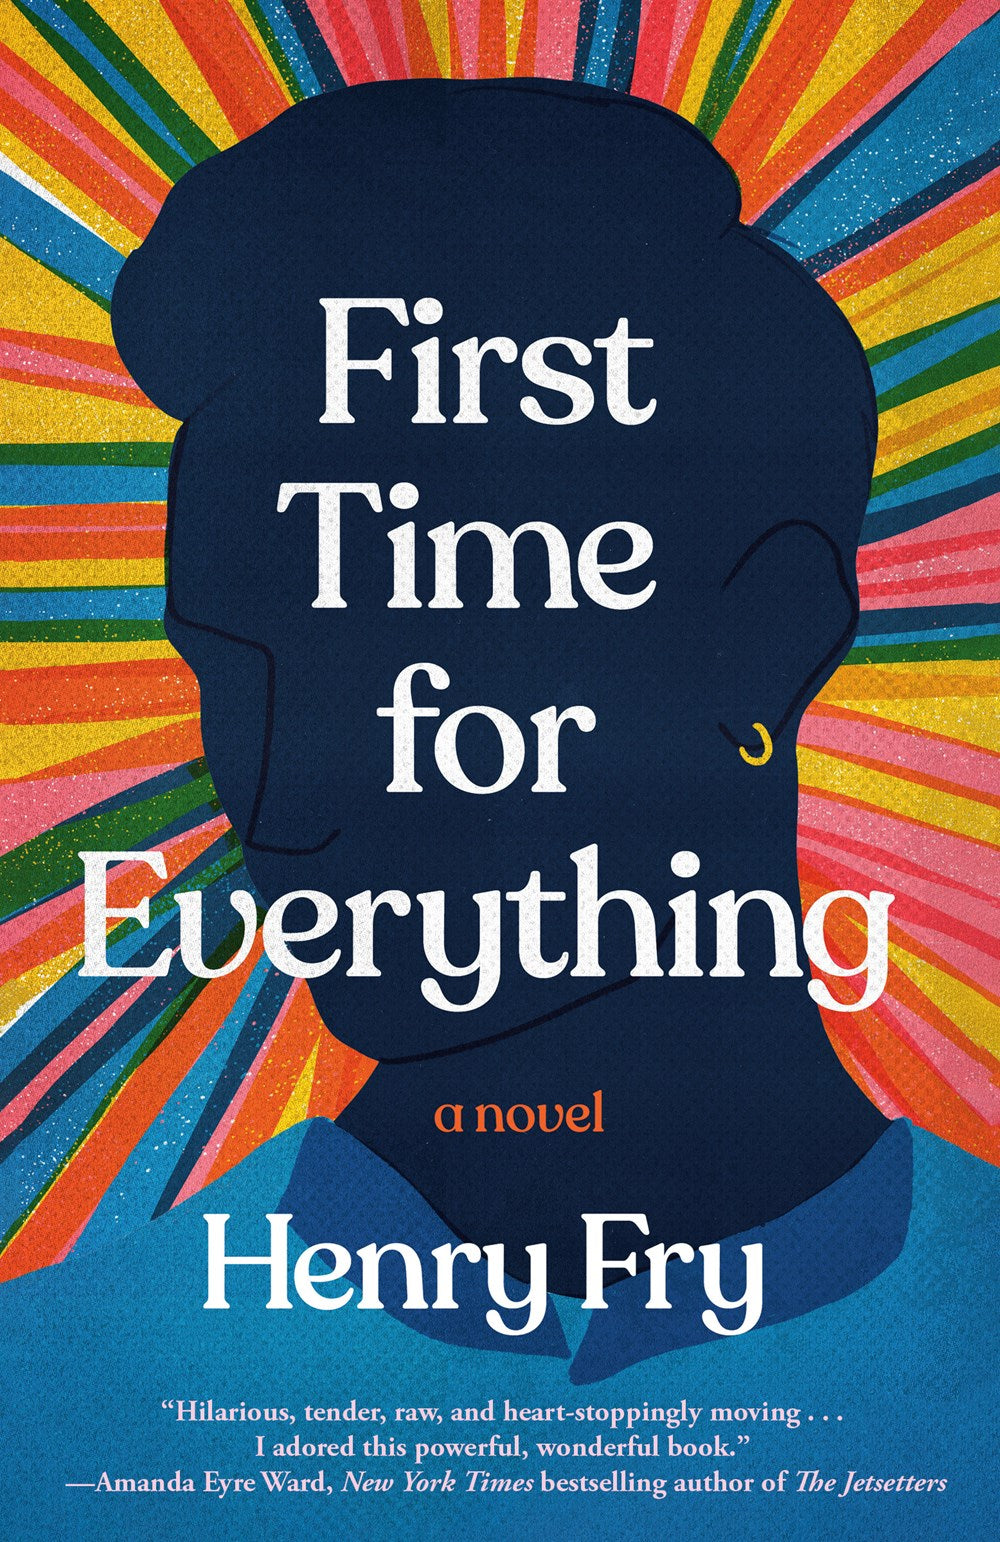 First Time For Everything by Henry Fry (Paperback)